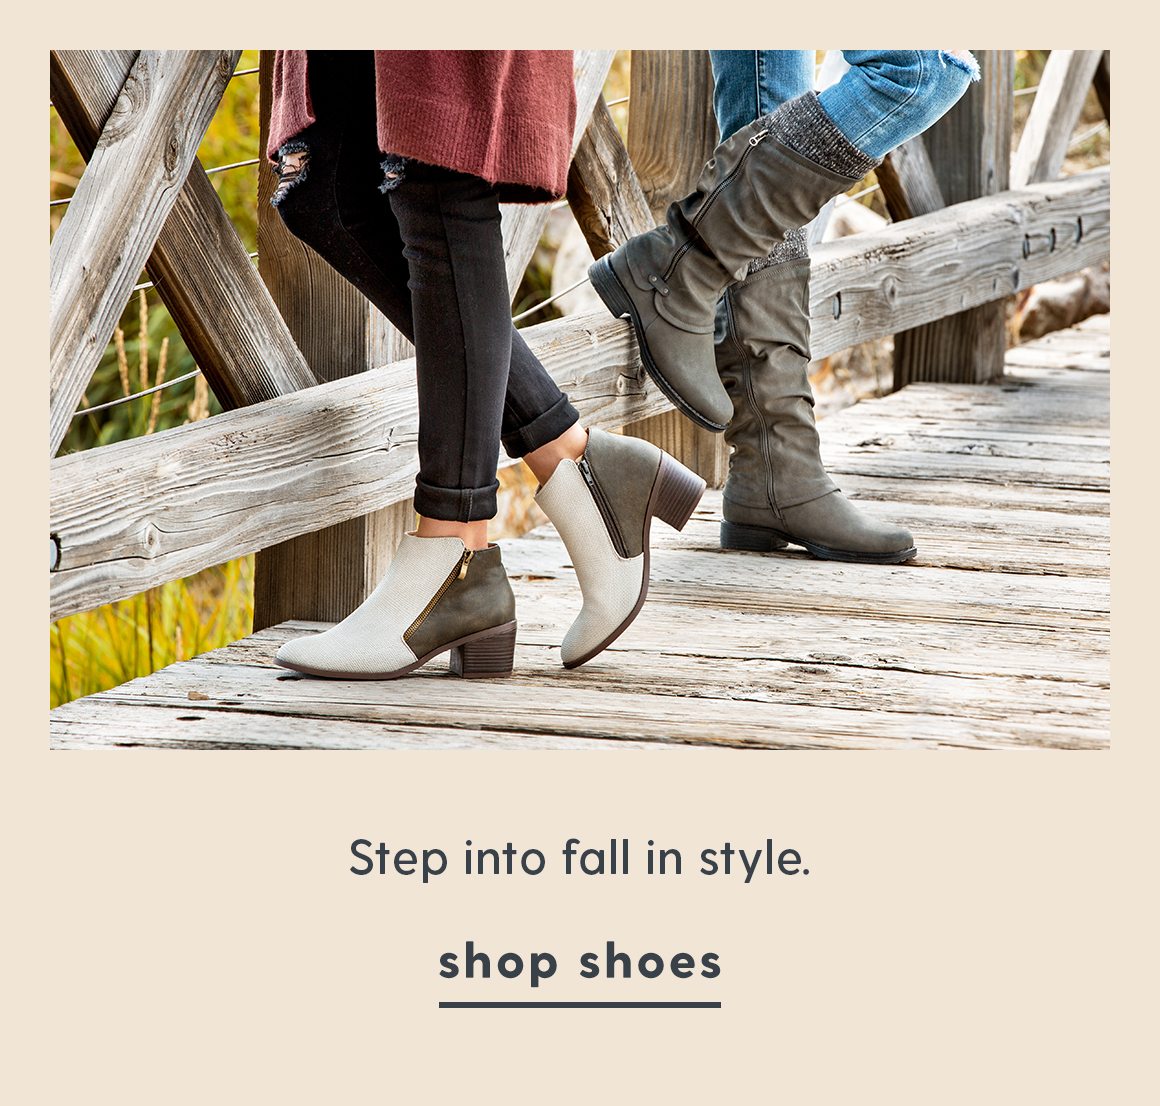 Step into fall in style. Shop shoes.